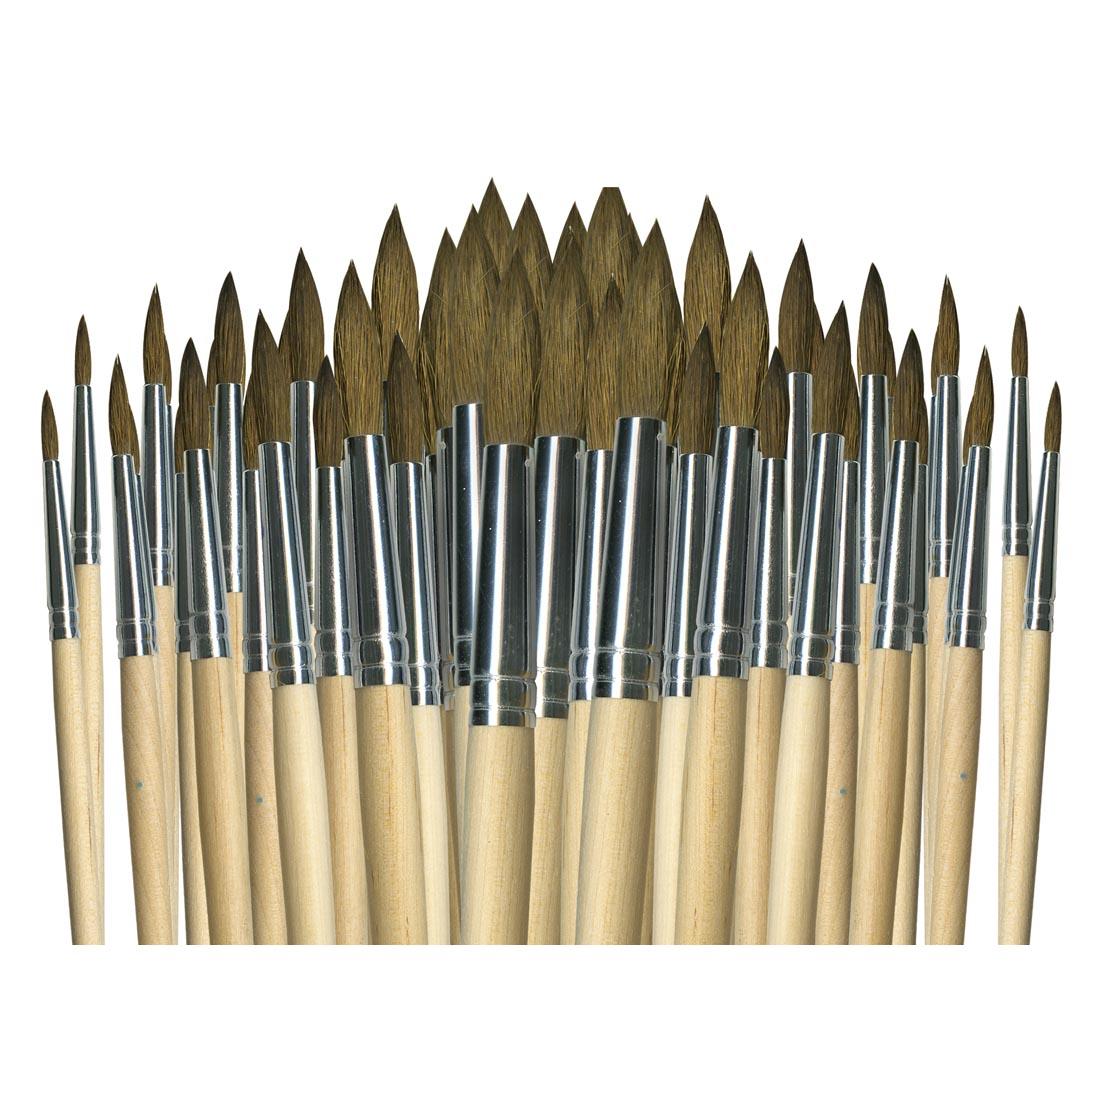 United Economy Synthetic Camel Hair Round Watercolor Brush Value Pack